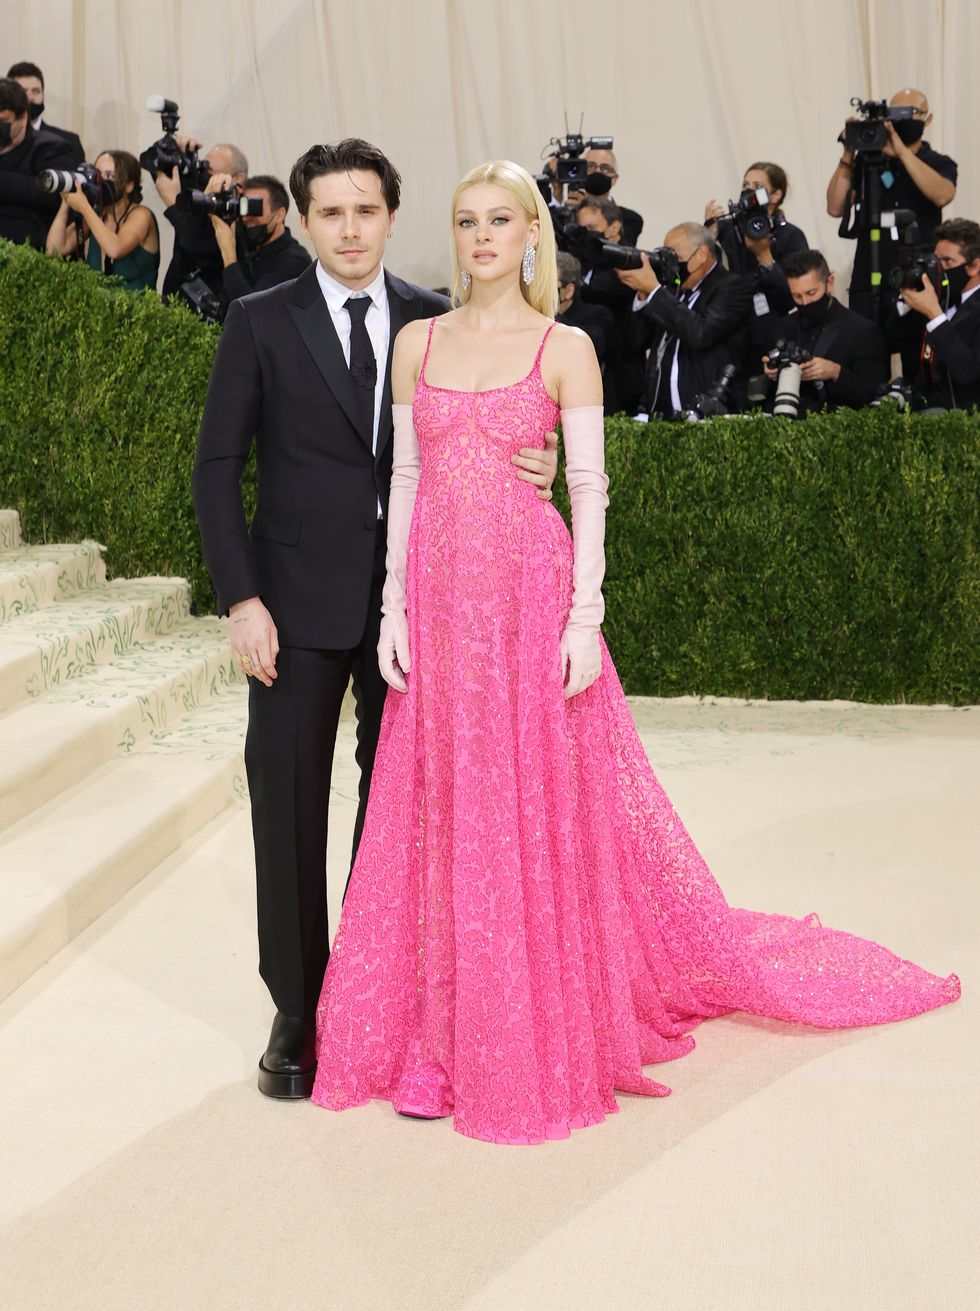 Christian Dior Haute Couture @ The 2021 Met Gala - Red Carpet Fashion Awards